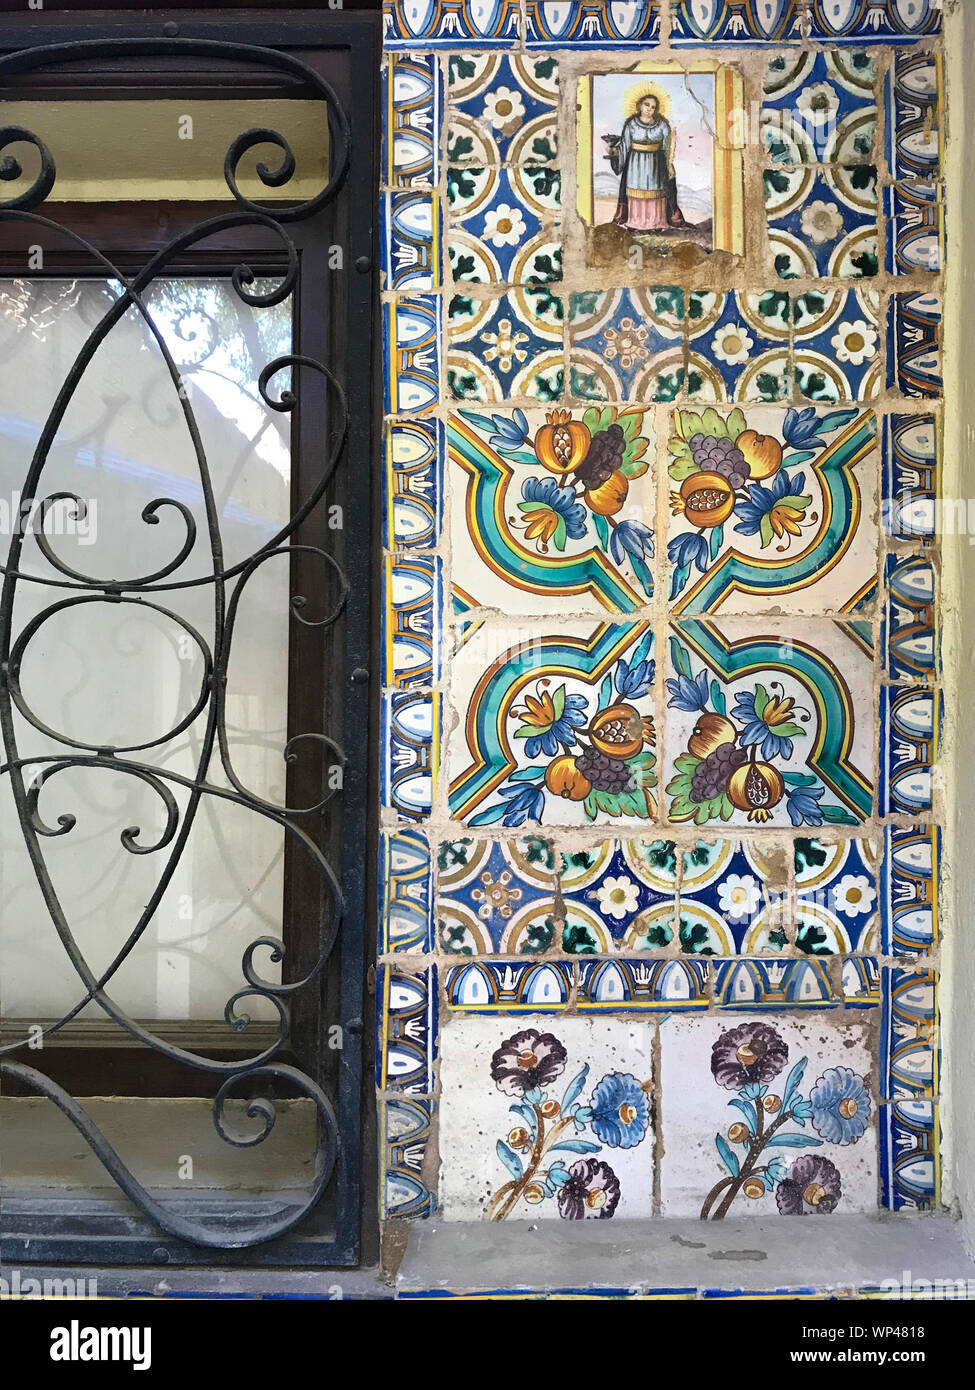 Spanish tiles next to an ironwork window in an outdoor public courtyard in Valencia, Spain, depicting, flowers, fruits and a woman Stock Photo